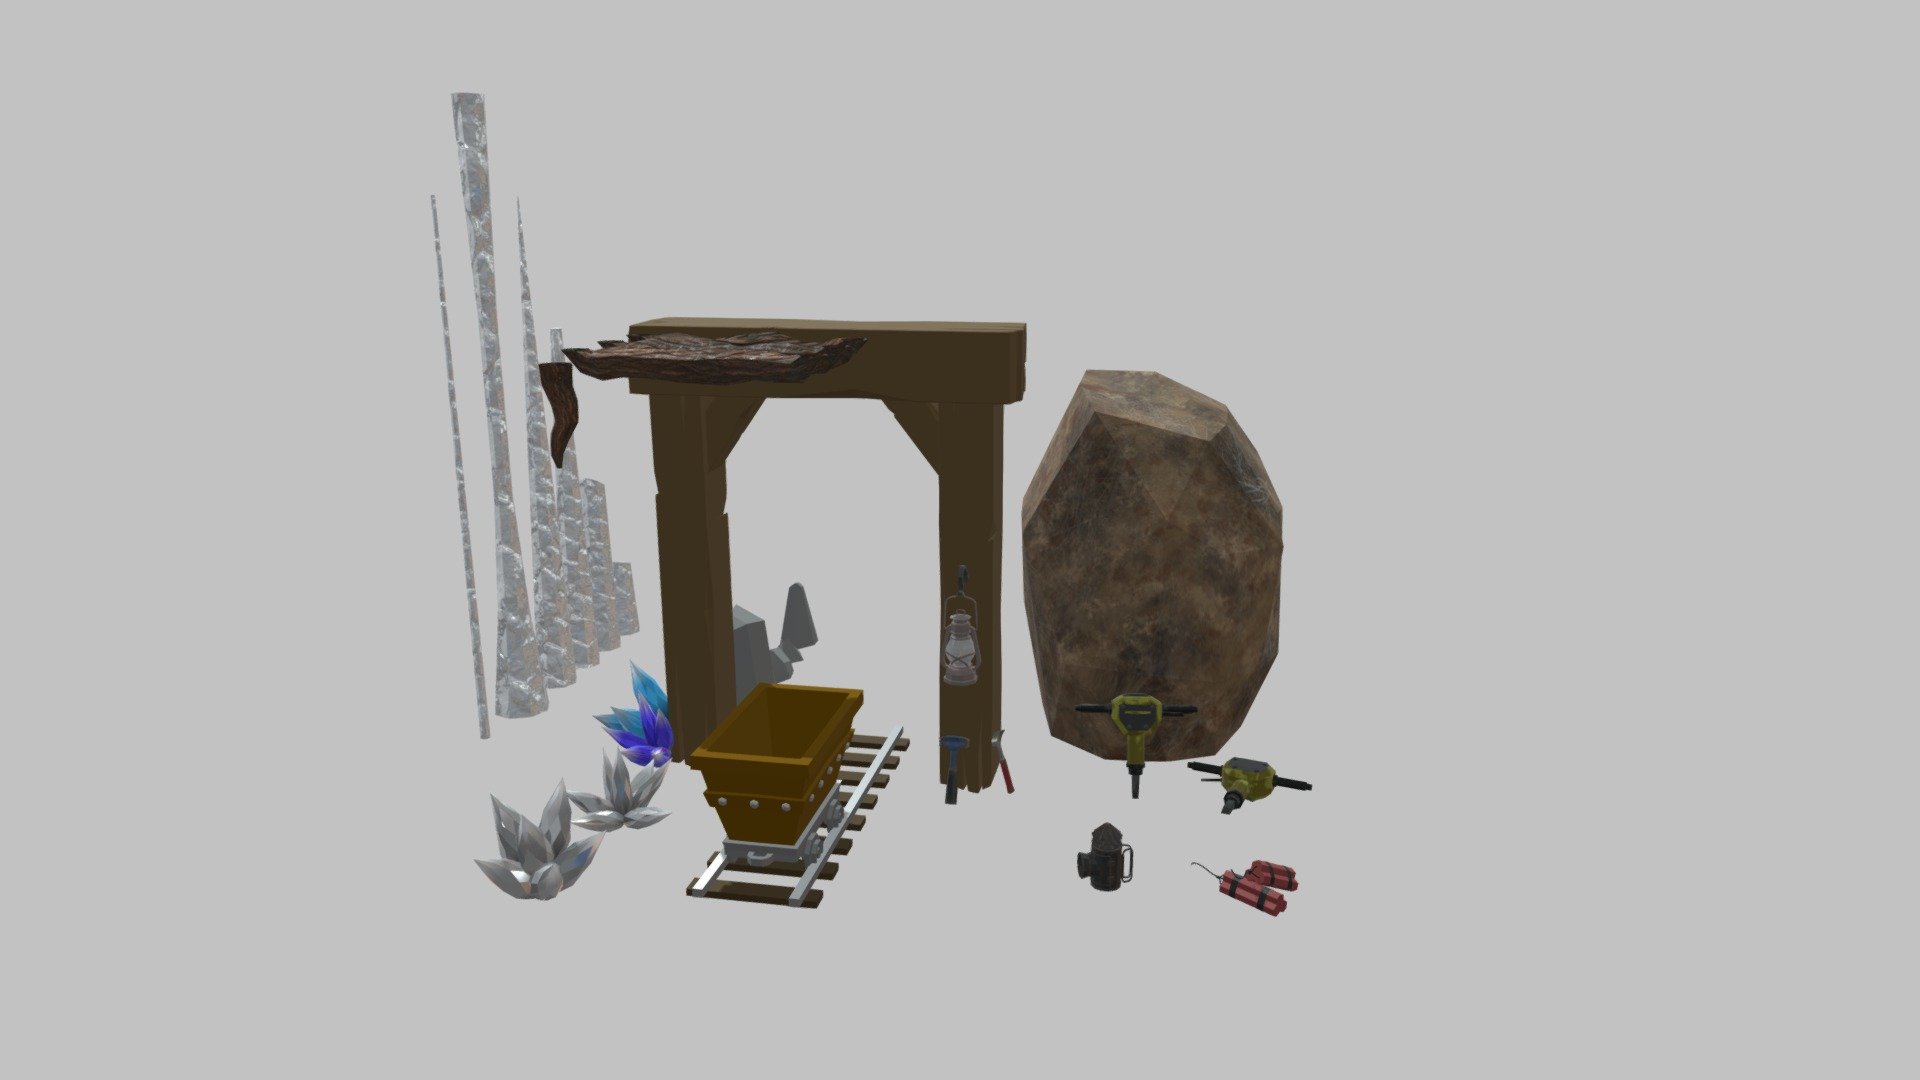 I modelled these for a game project at school in spring 2020. Everything is low poly. The project lasted for a few months so I had a lot of time to make mine related assets. My group had many people so I didn't always texture my models. The minecart, rails, small rocks, doorway, lantern and dynamites were not textured by me so I didn't include their textures here. I gave them materials in Maya 3d model